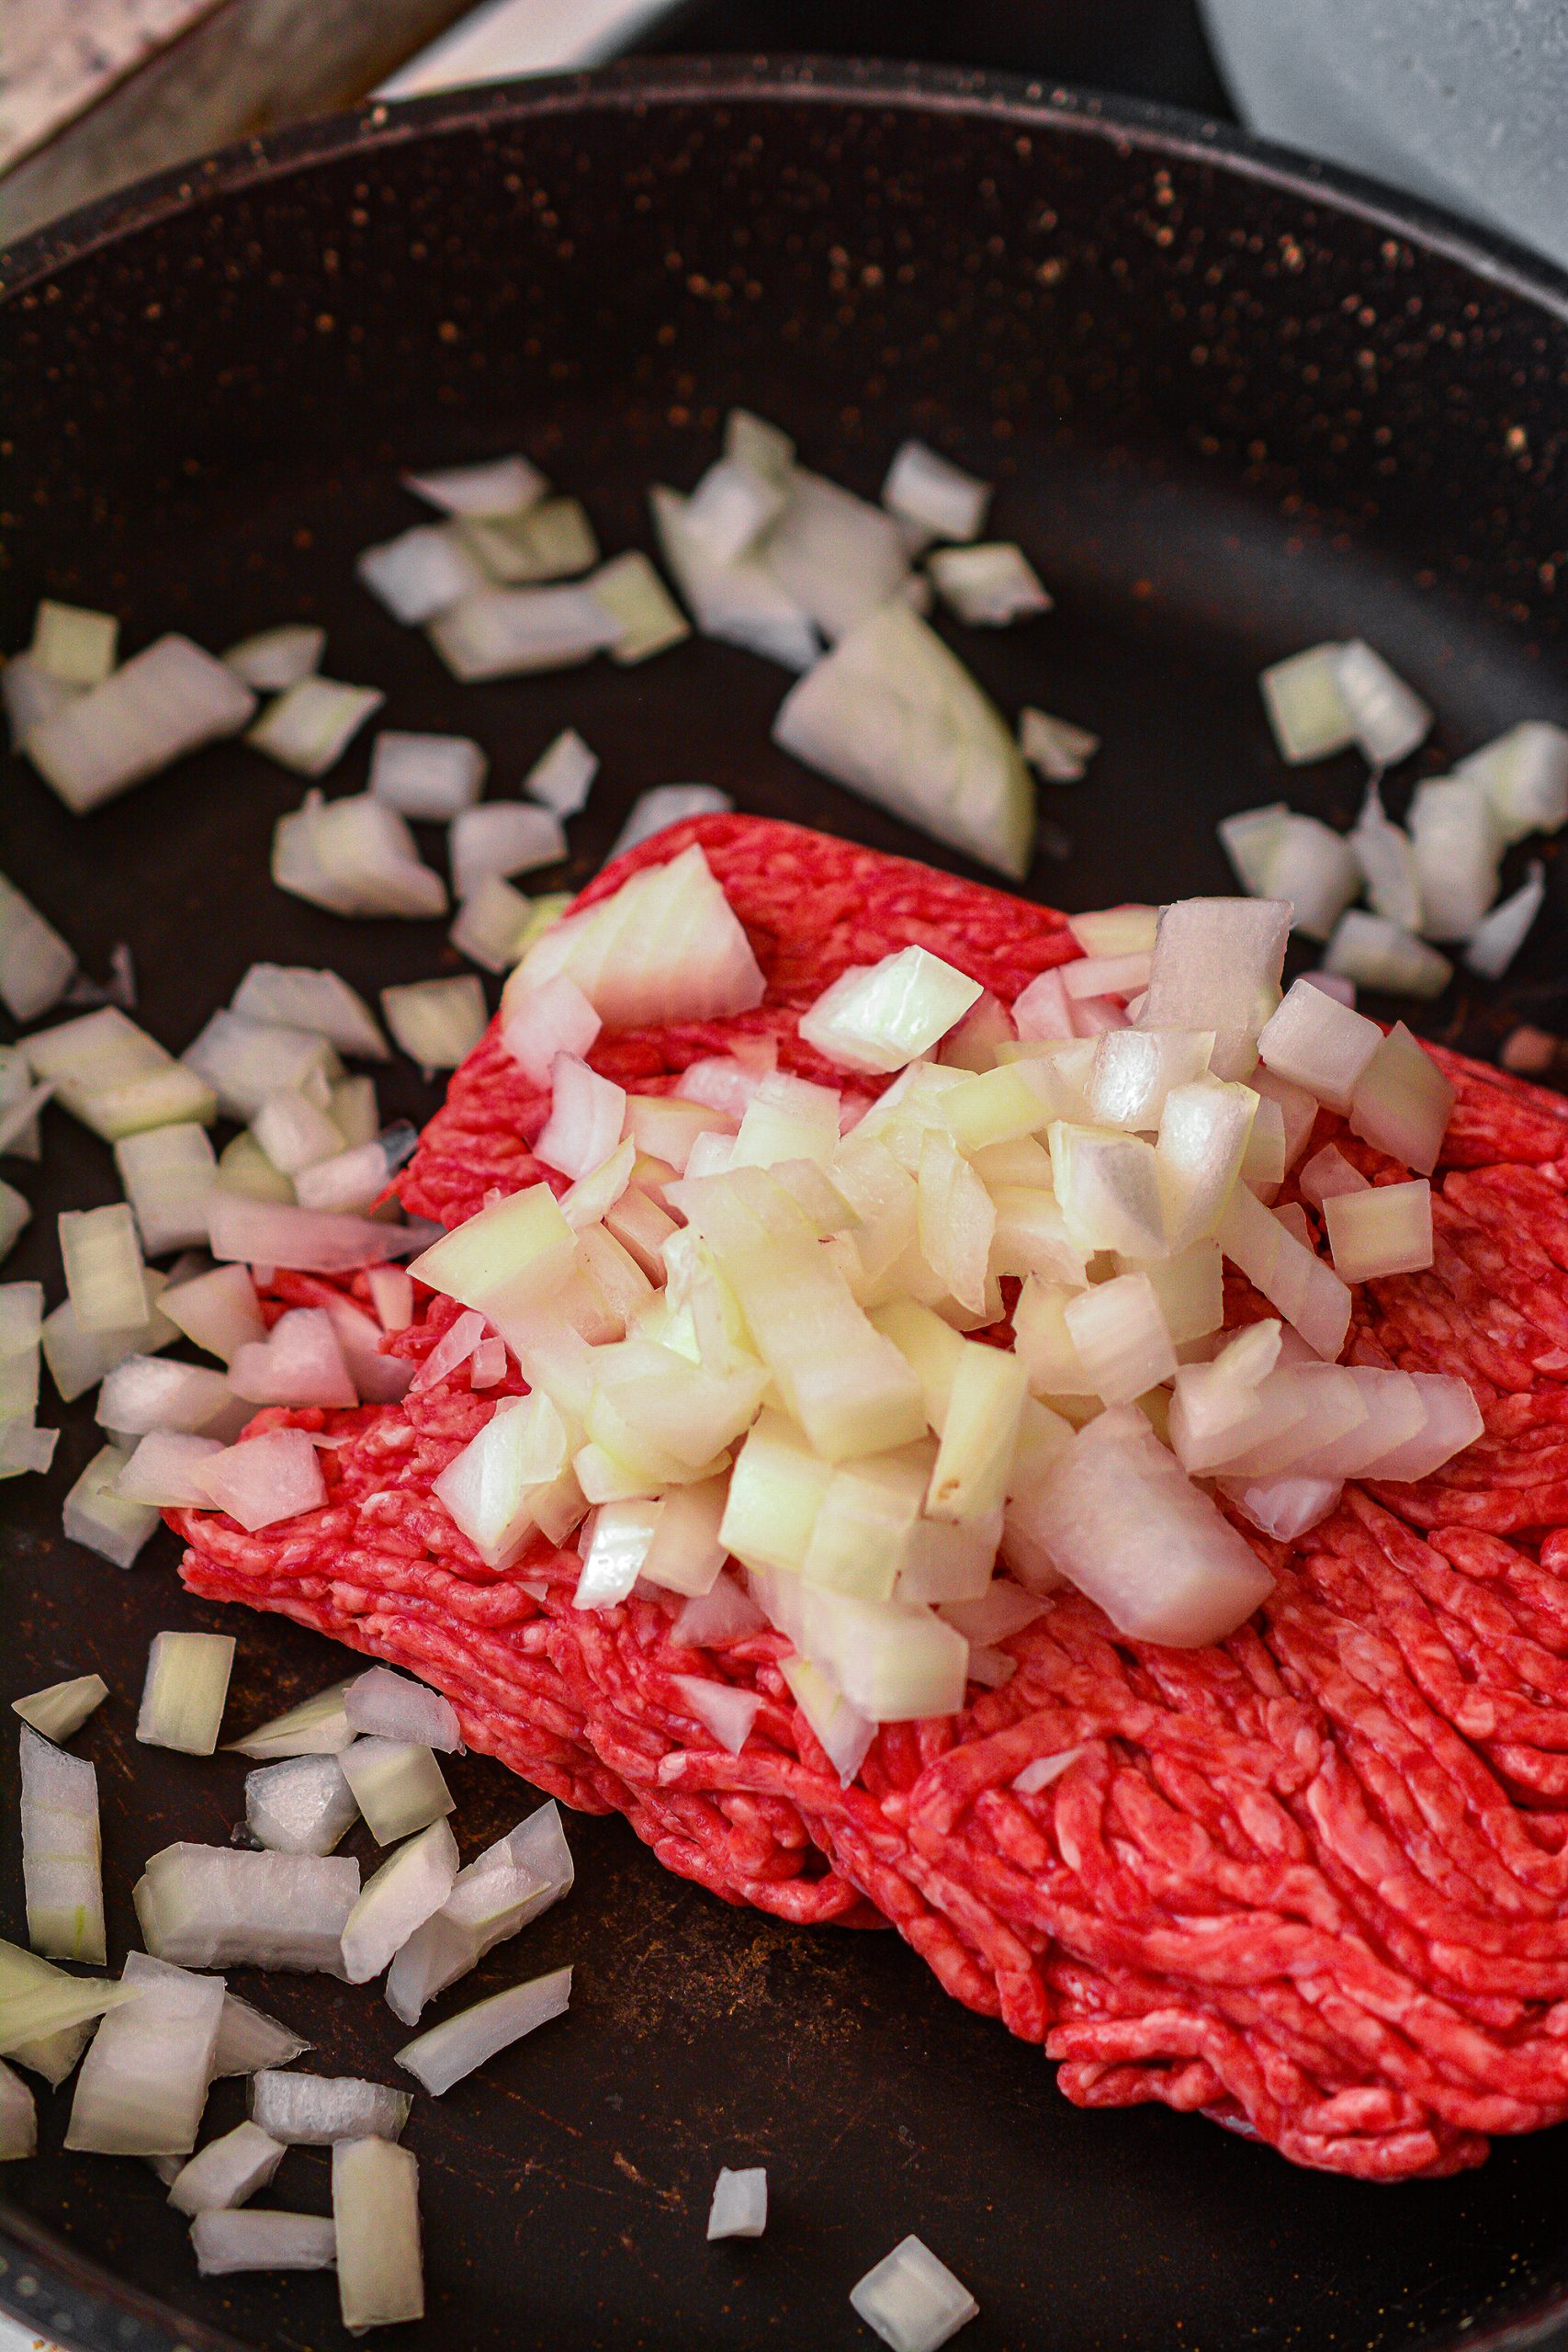 While the fries are cooking, cook the ground beef and onion over medium-high heat on the stove.